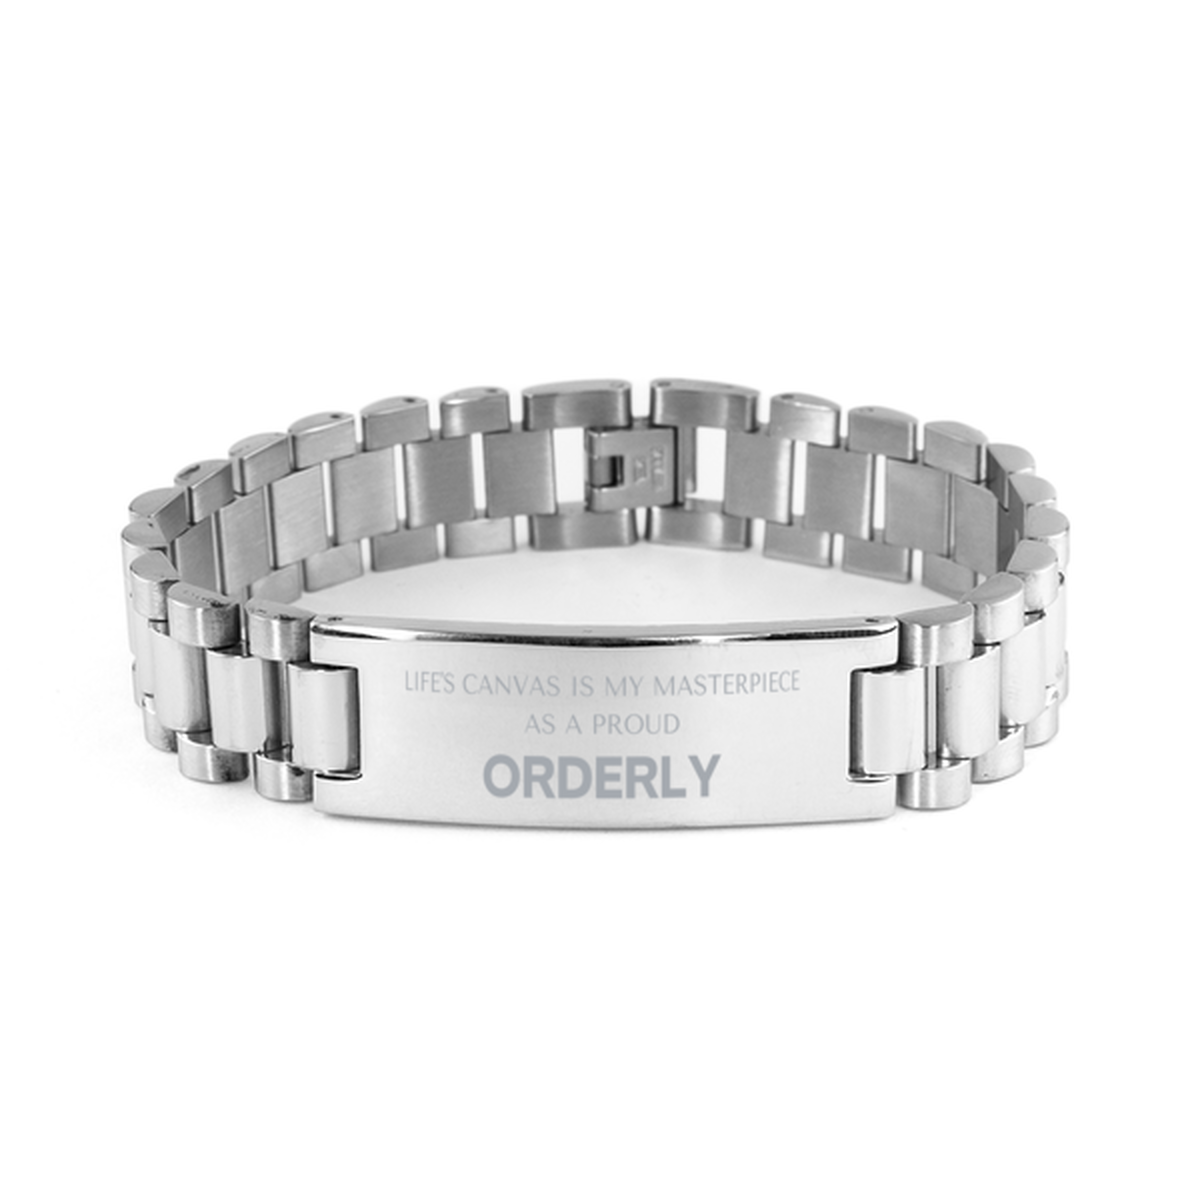 Proud Orderly Gifts, Life's canvas is my masterpiece, Epic Birthday Christmas Unique Ladder Stainless Steel Bracelet For Orderly, Coworkers, Men, Women, Friends